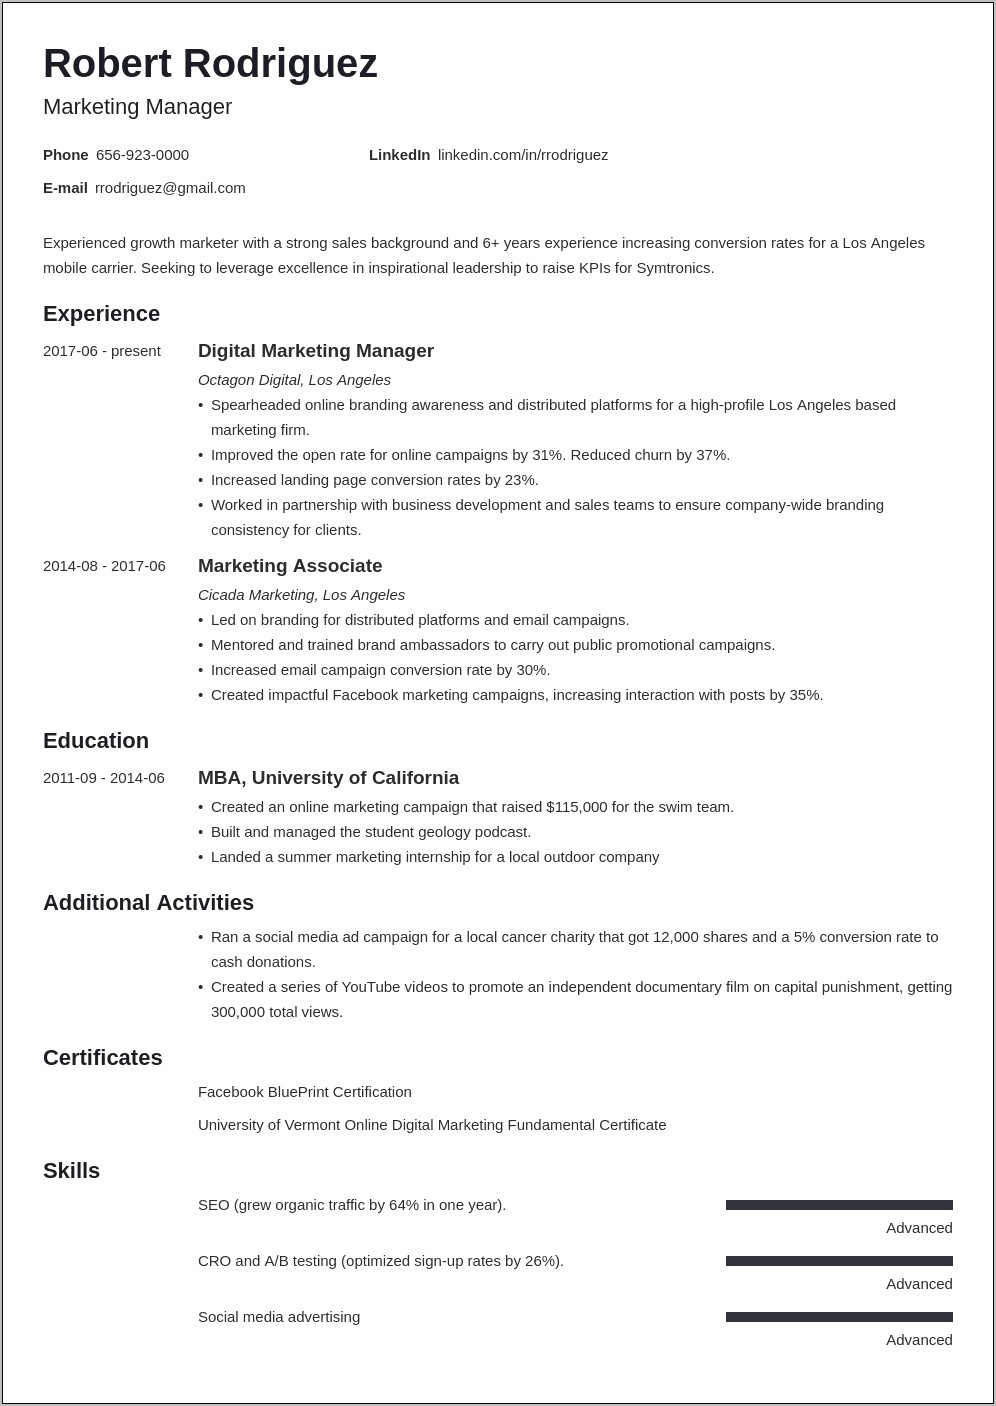 Resume Fill Up Form Free Download